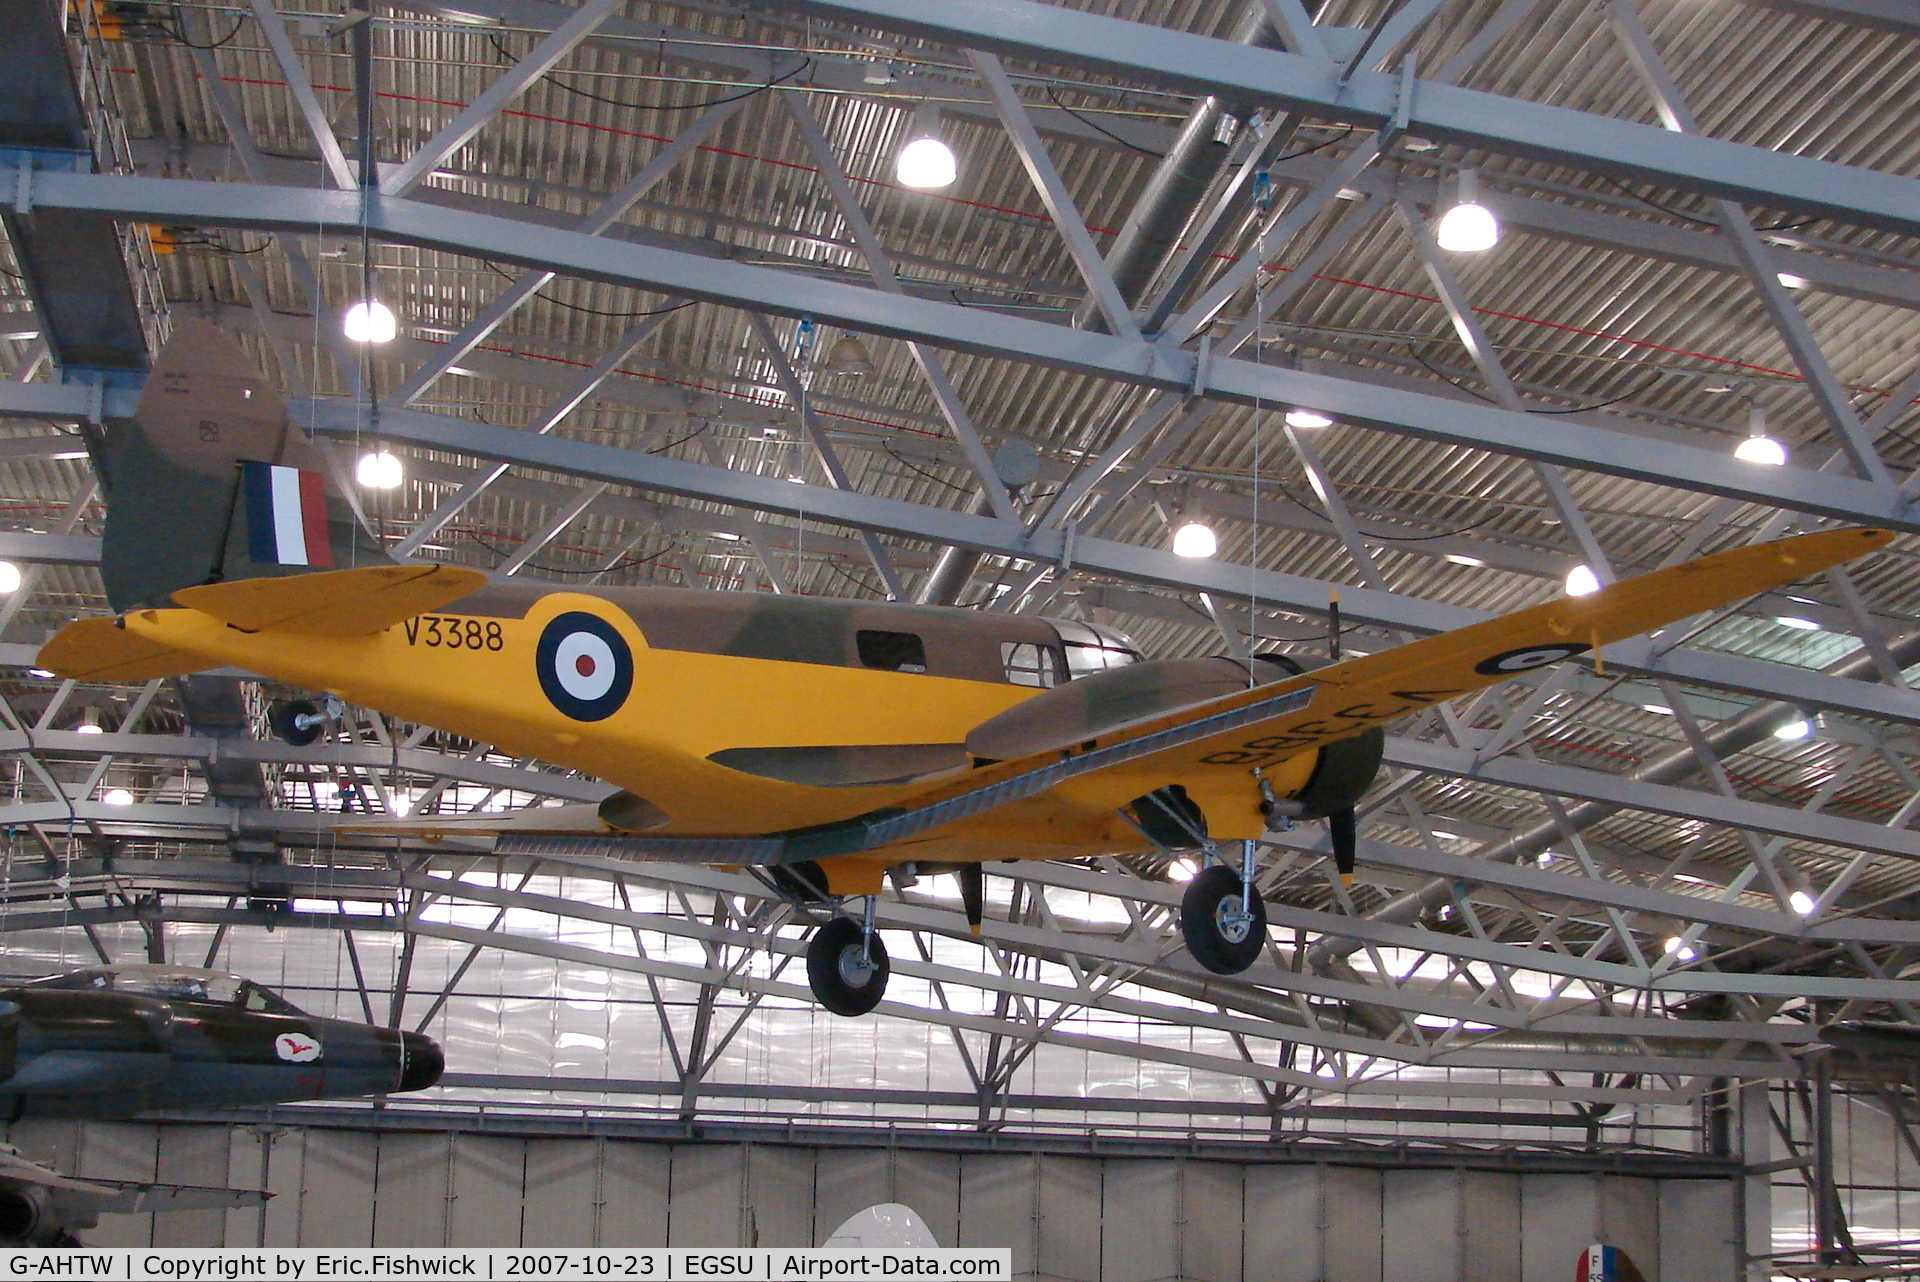 G-AHTW, 1940 Airspeed AS.10 Oxford I C/N 3083, 2. Airspeed AS-40 Oxford 1 at at The Imperial War Museum, Duxford